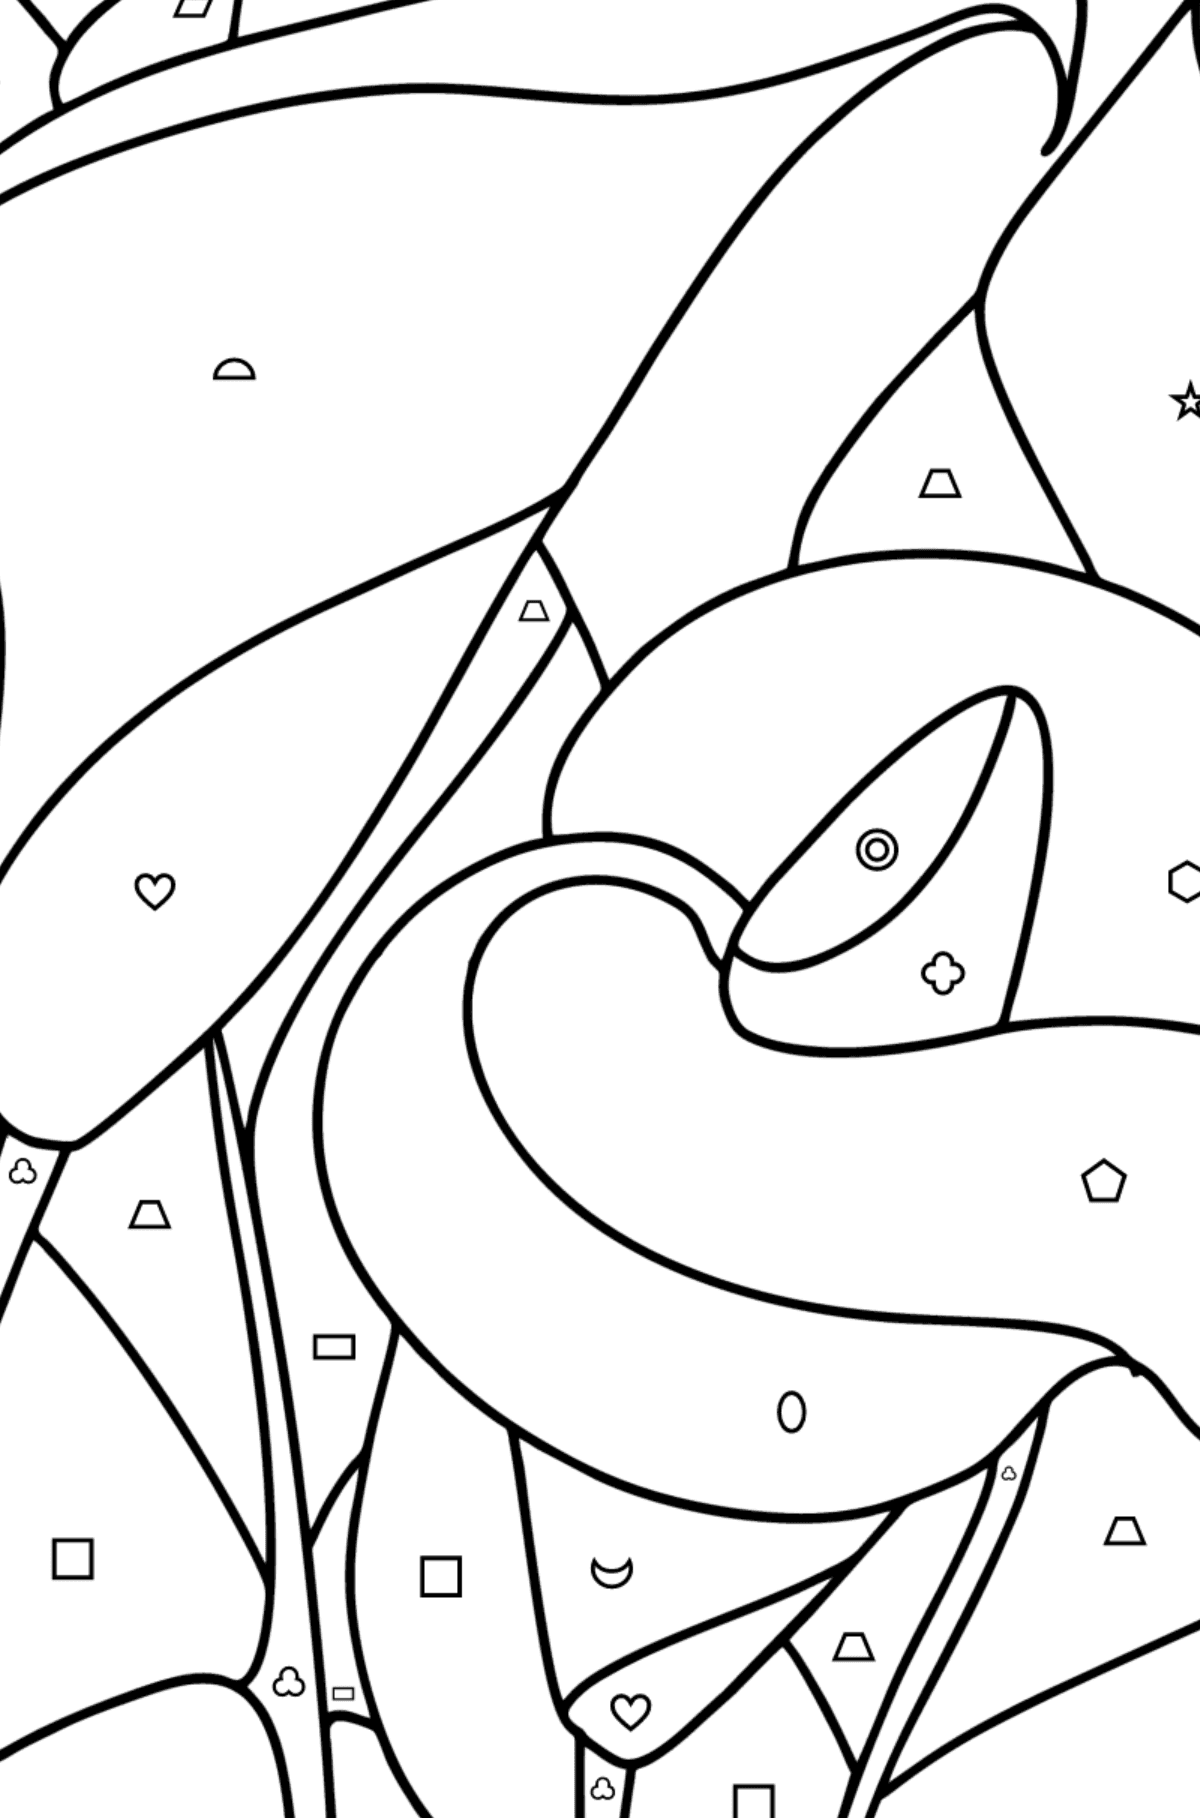 Calla coloring page - Coloring by Geometric Shapes for Kids